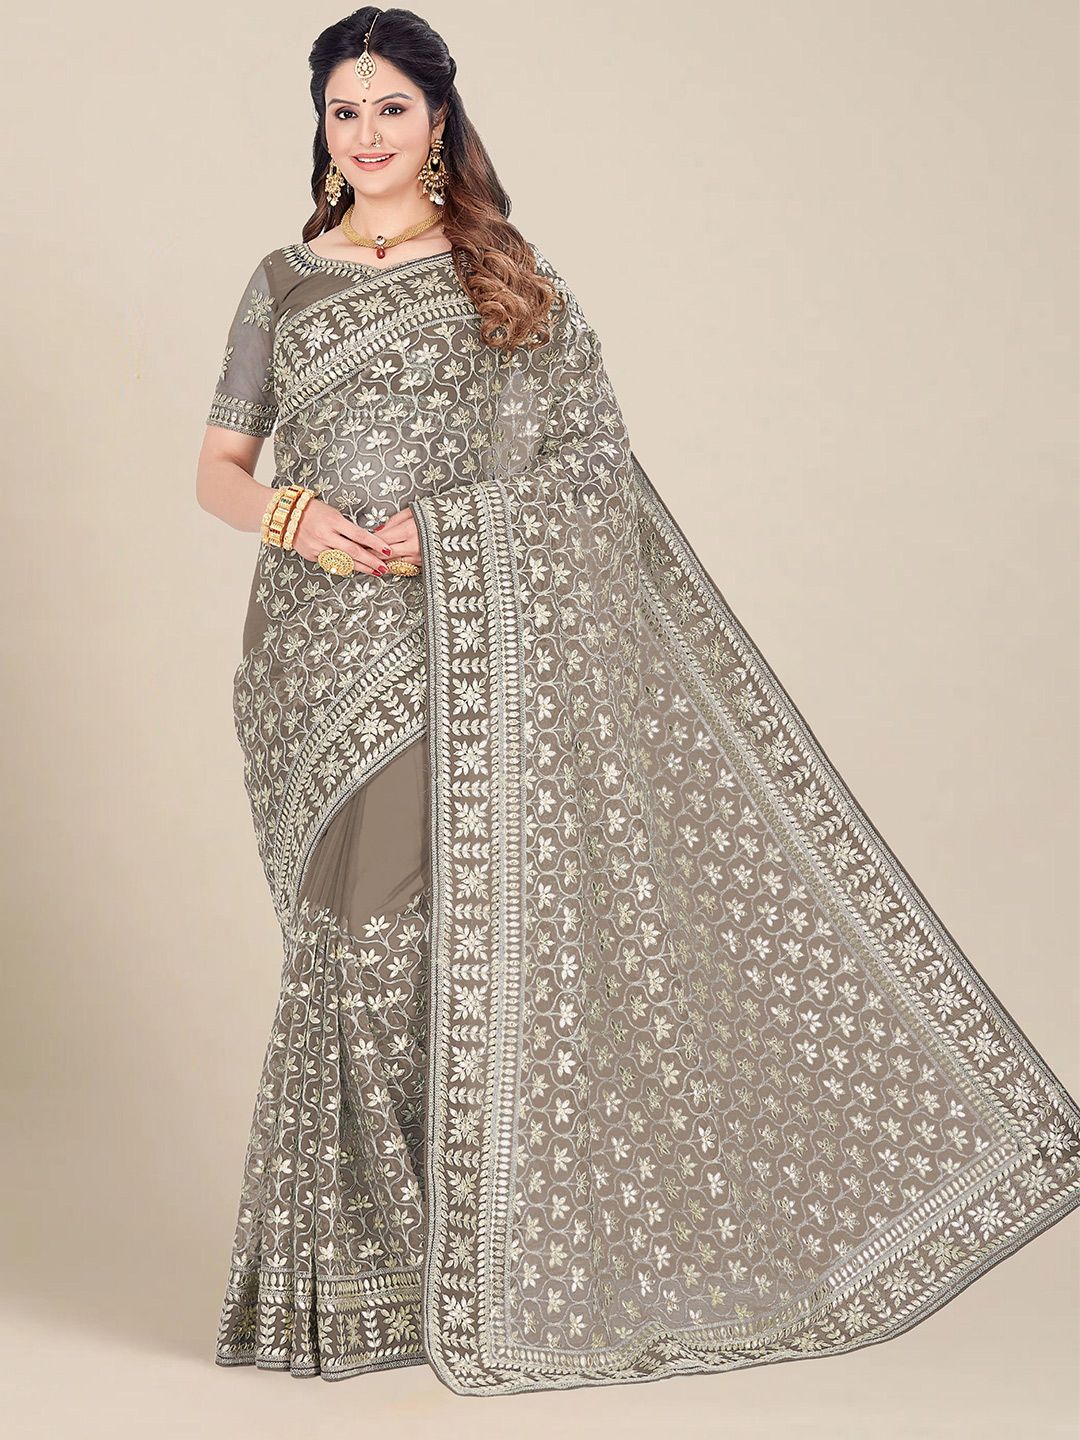 MS RETAIL Beige & Gold-Toned Embellished & Embroidered Net Heavy Work Saree Price in India